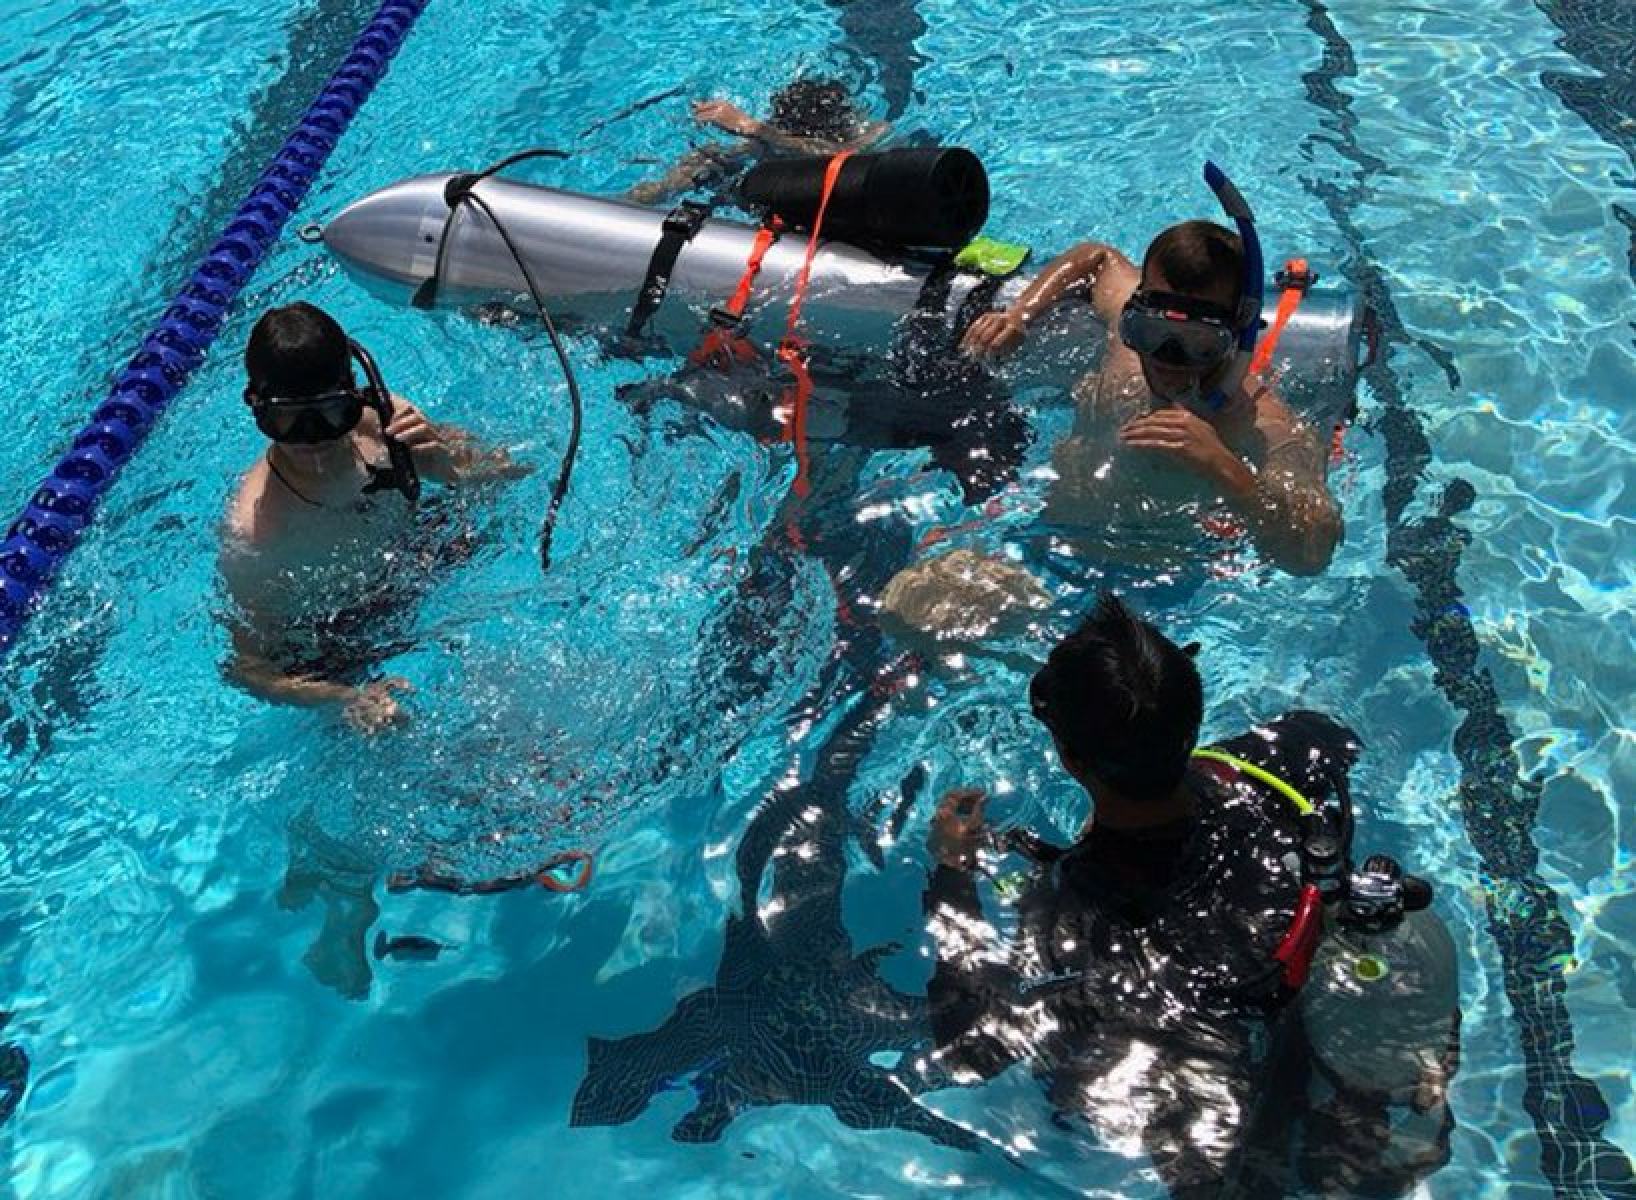 Elon Musk’s SpaceX created a mini submarine to help in the celebrated rescue of a youth football team trapped in a cave in Thailand in 2018. Photo: @designboom/Twitter